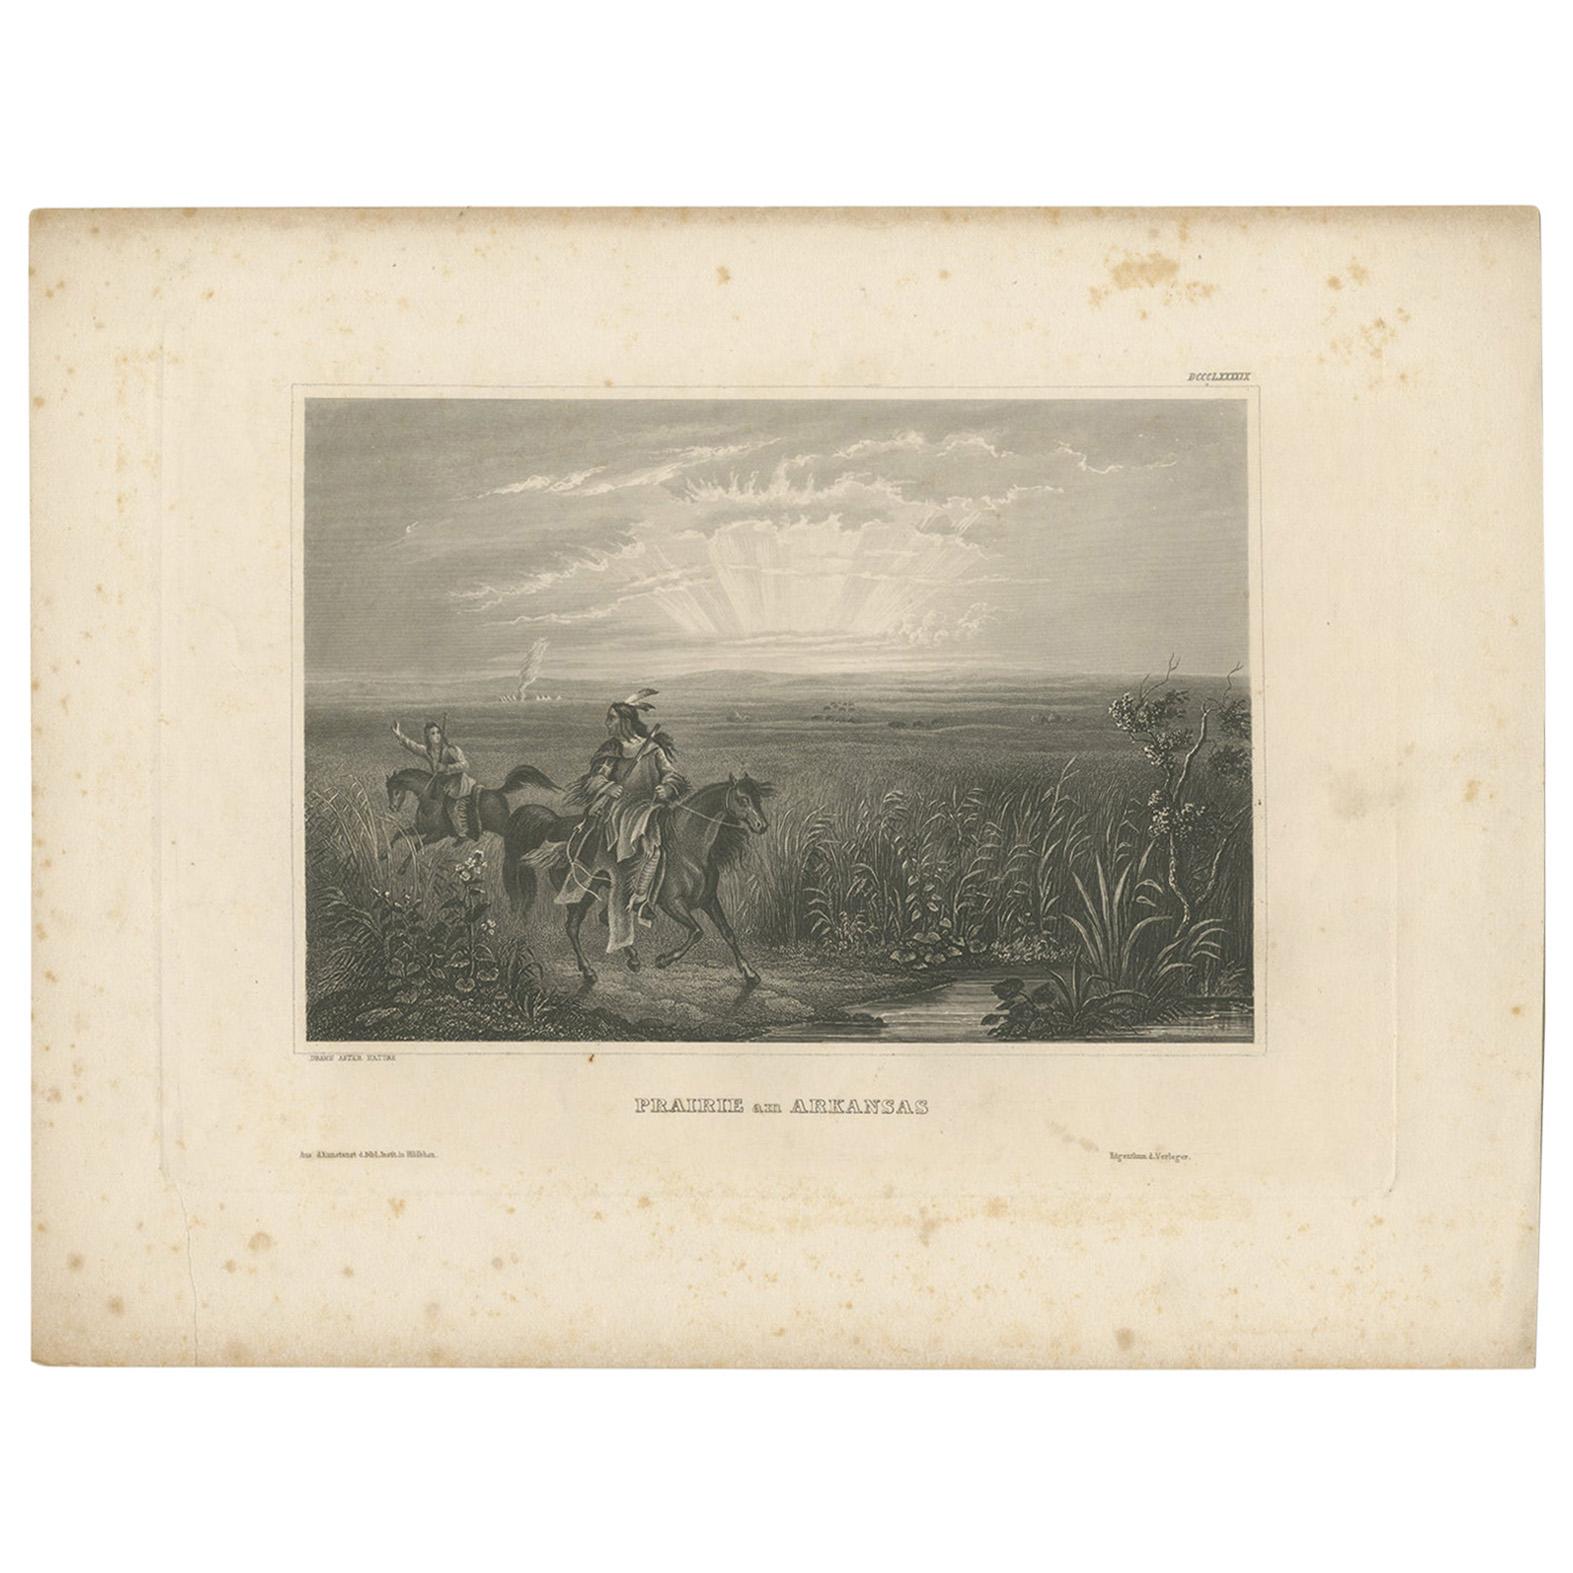 Antique Print of Native American Indians on a Prairie in Arkansas '1857'